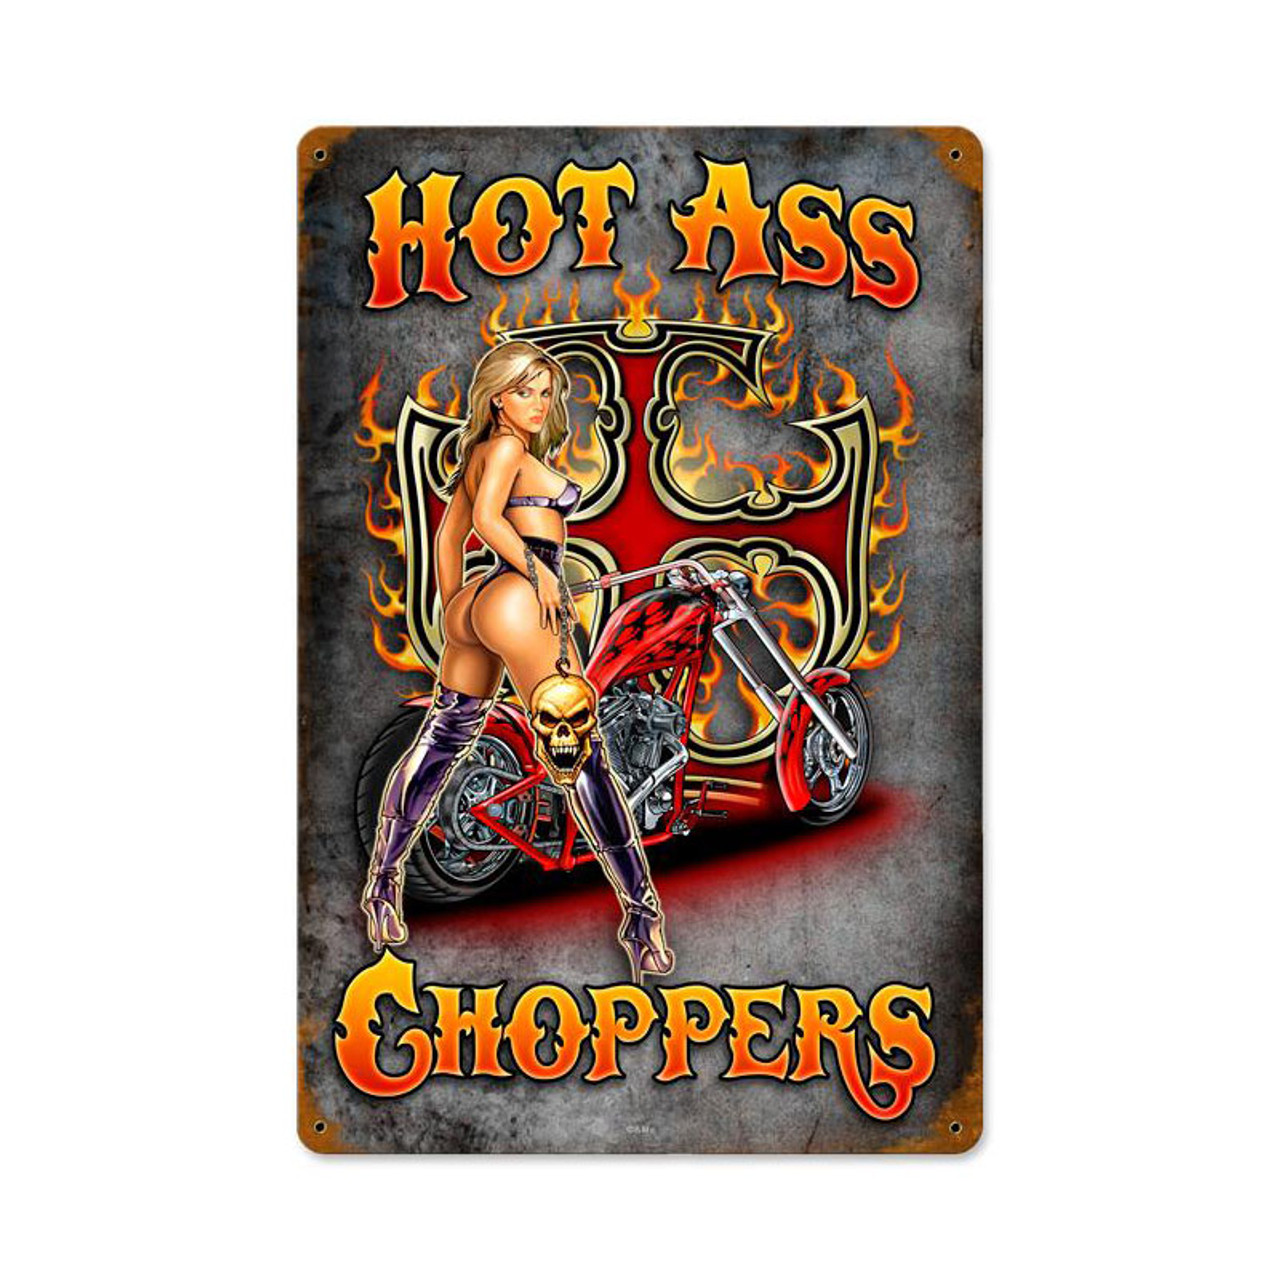 Hot Ass Chopers Metal Sign 12 x 18 Inches